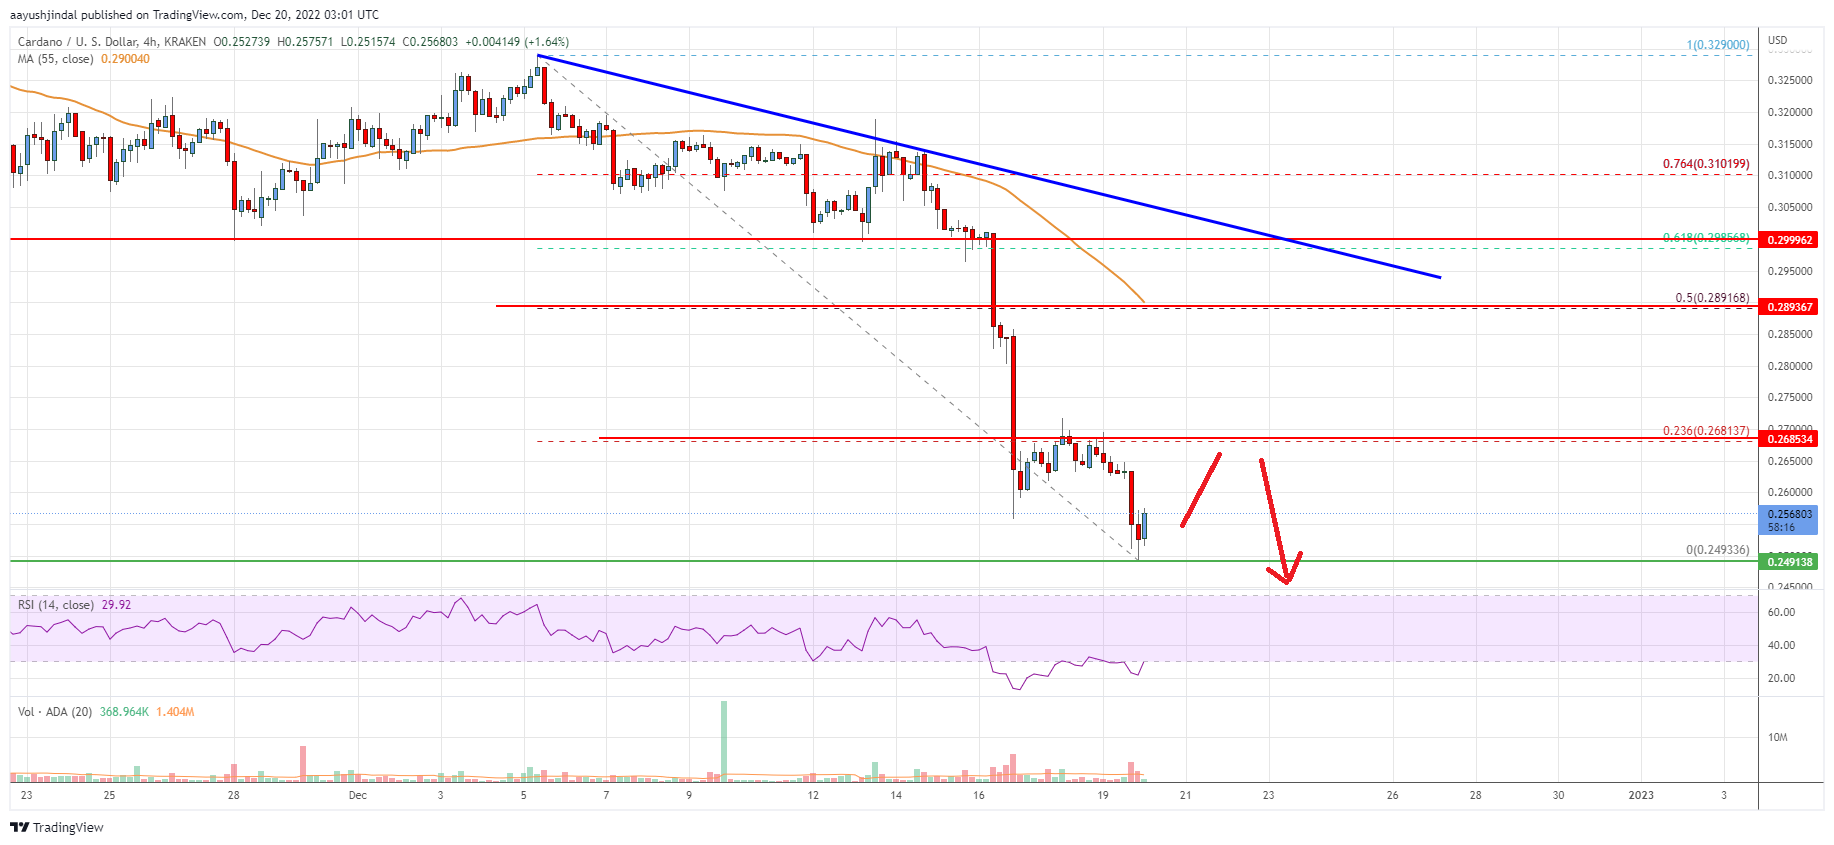 Cardano (ADA) Price Analysis: Bears In Control, Upsides Could Be Limited